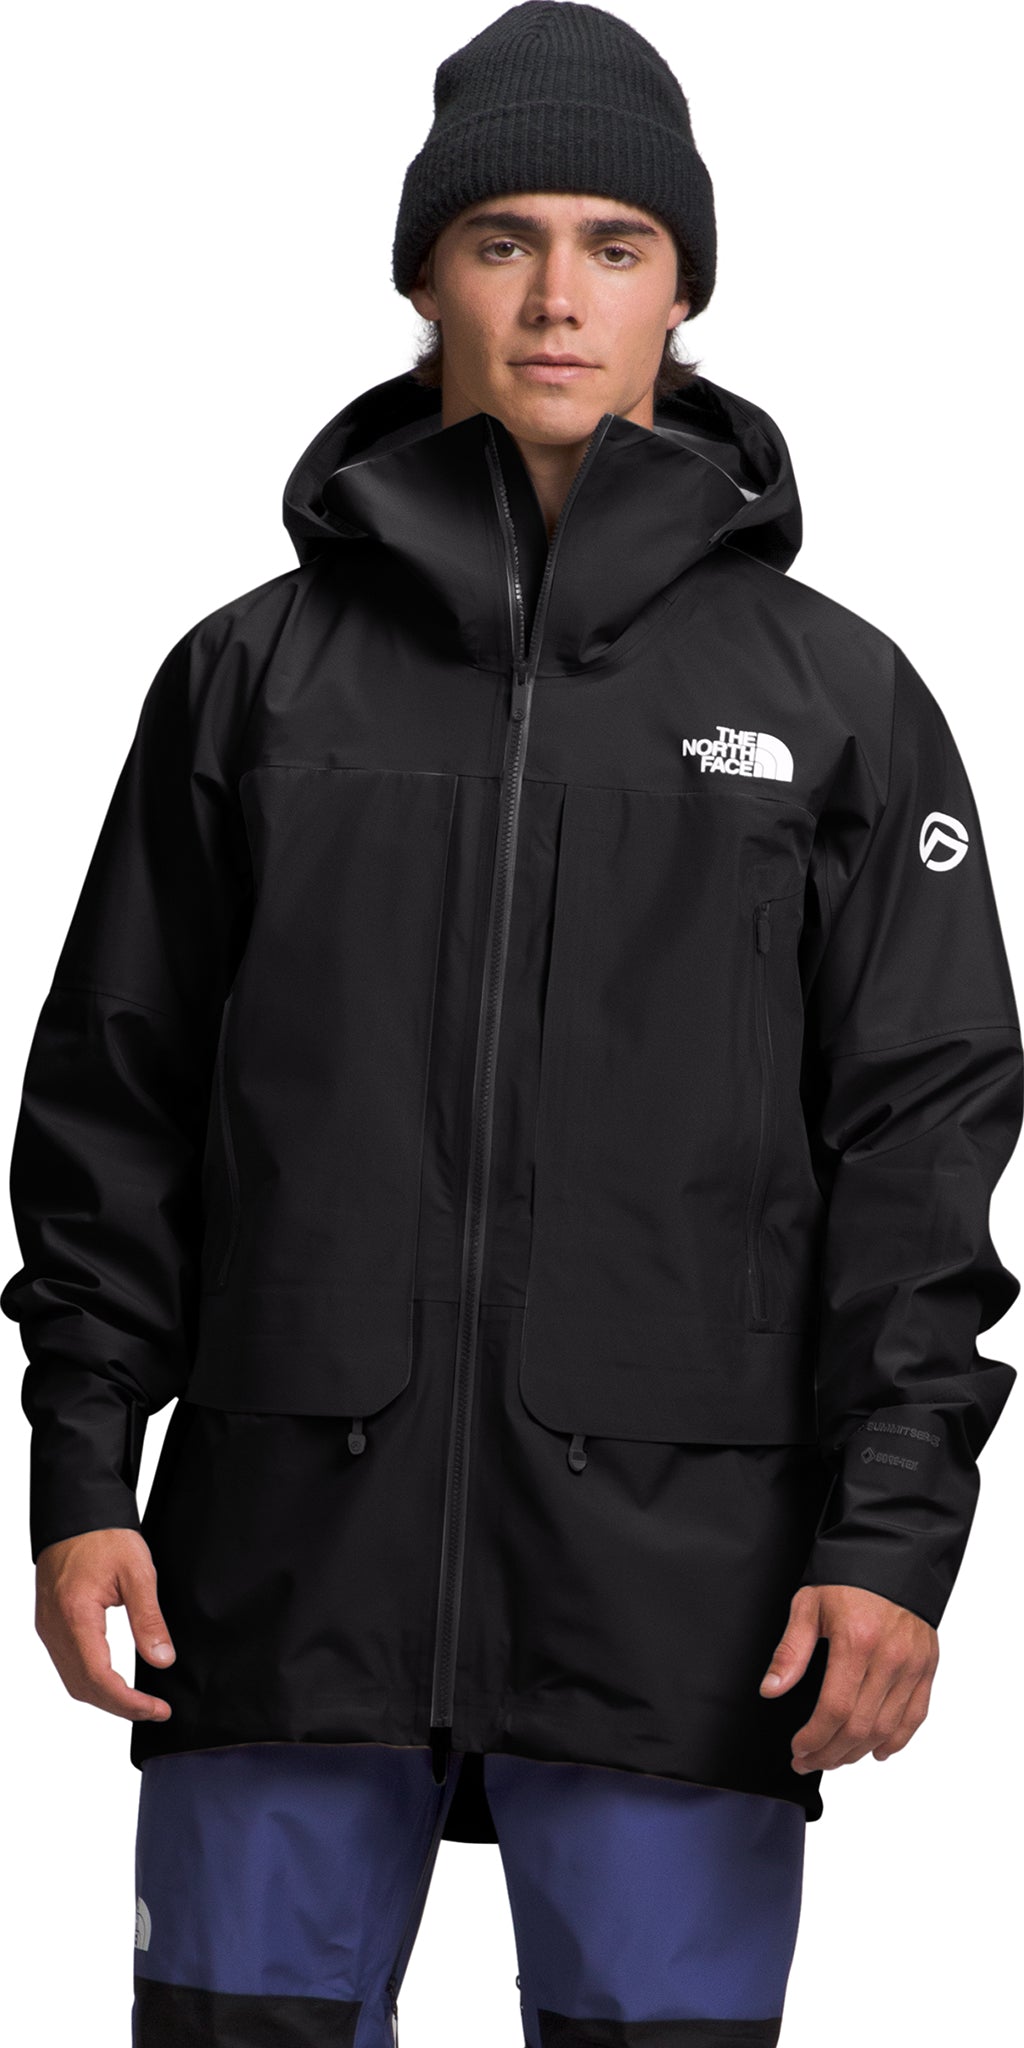 Shop The North Face | Altitude Sports